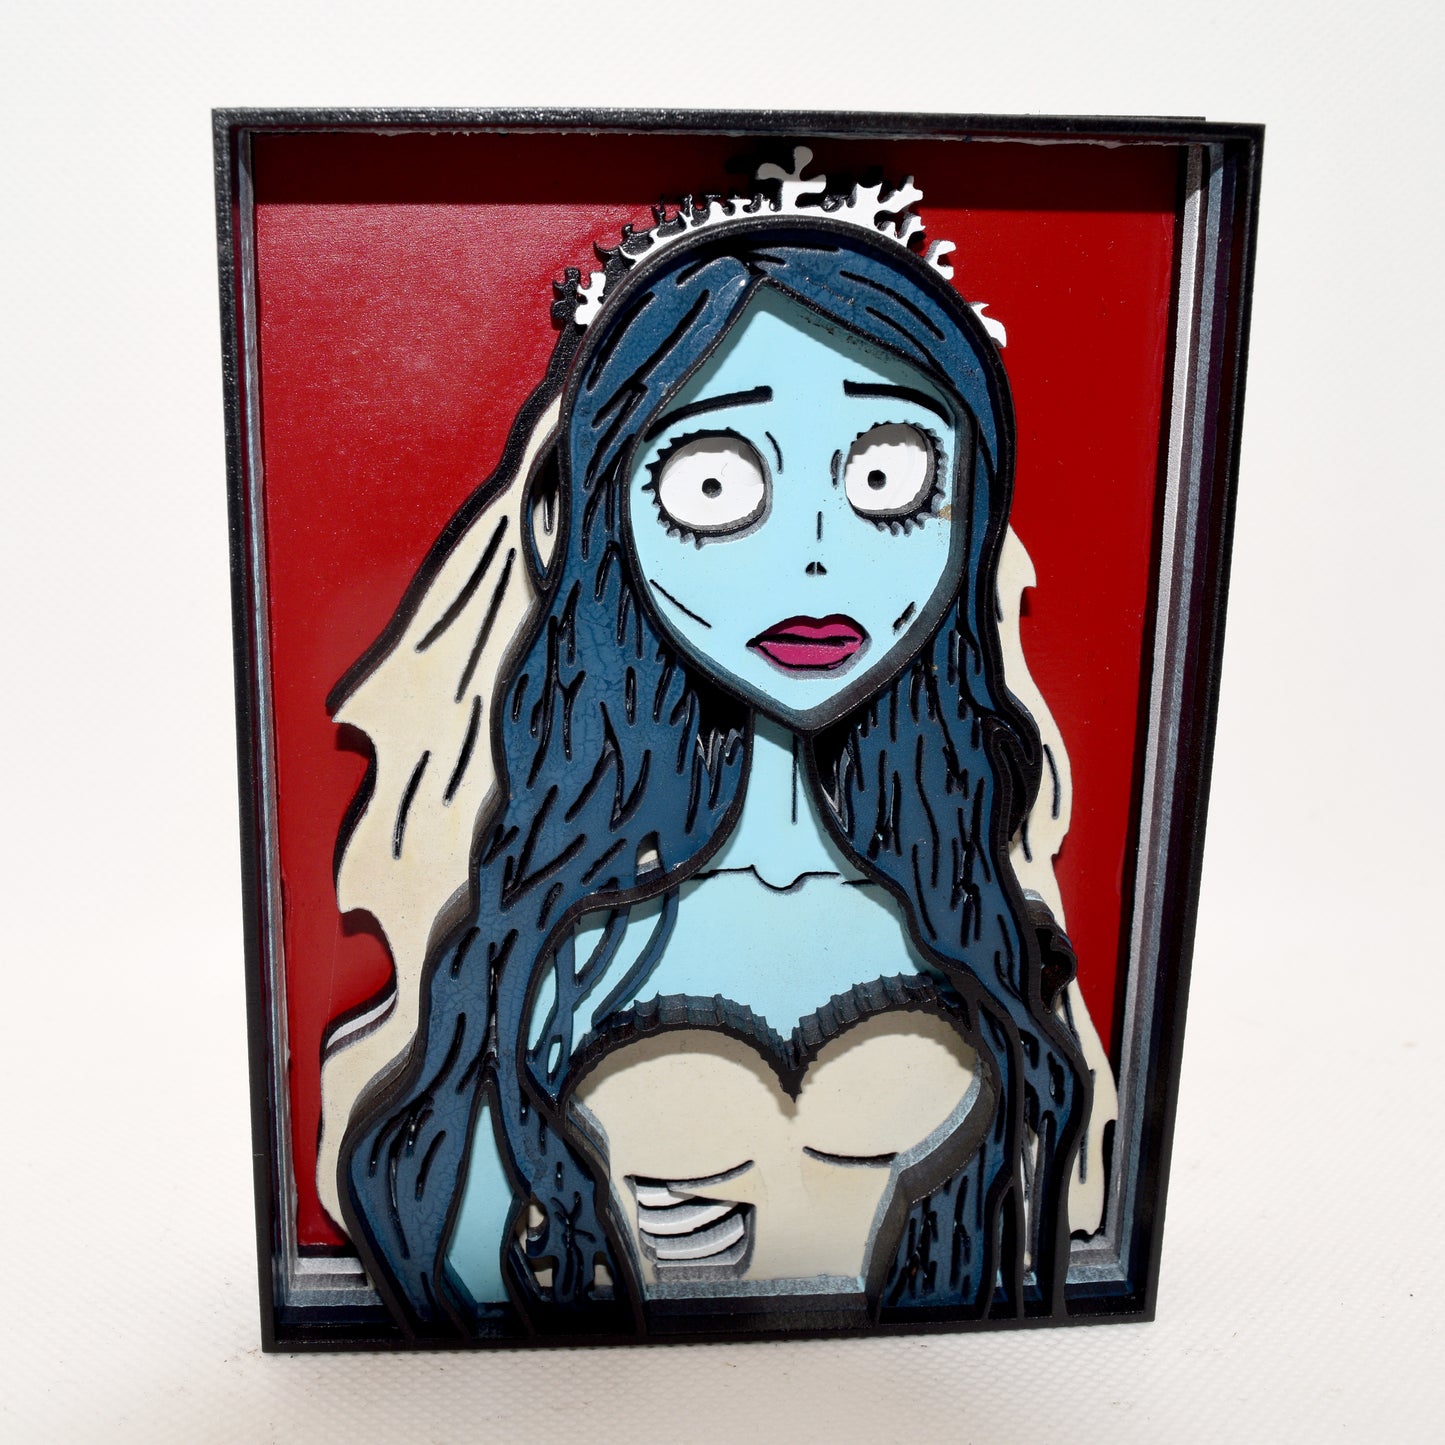 3-D Layered Emily (Corpse Bride) Wooden Art